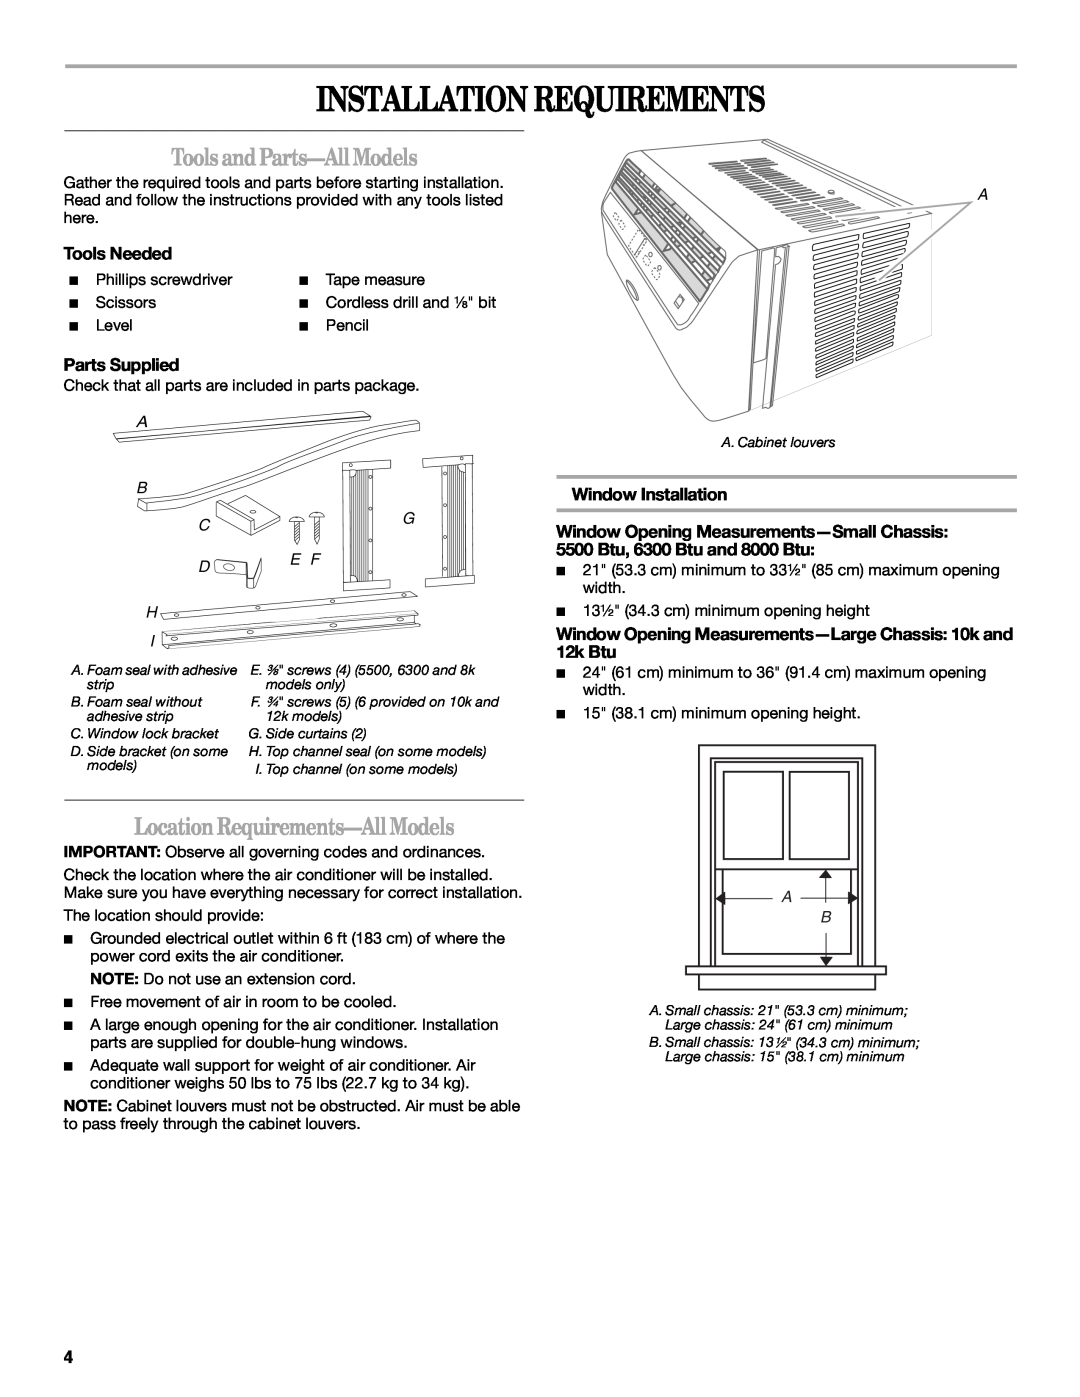 Whirlpool 66161279 Installation Requirements, Tools and Parts-AllModels, Location Requirements-AllModels, Tools Needed 